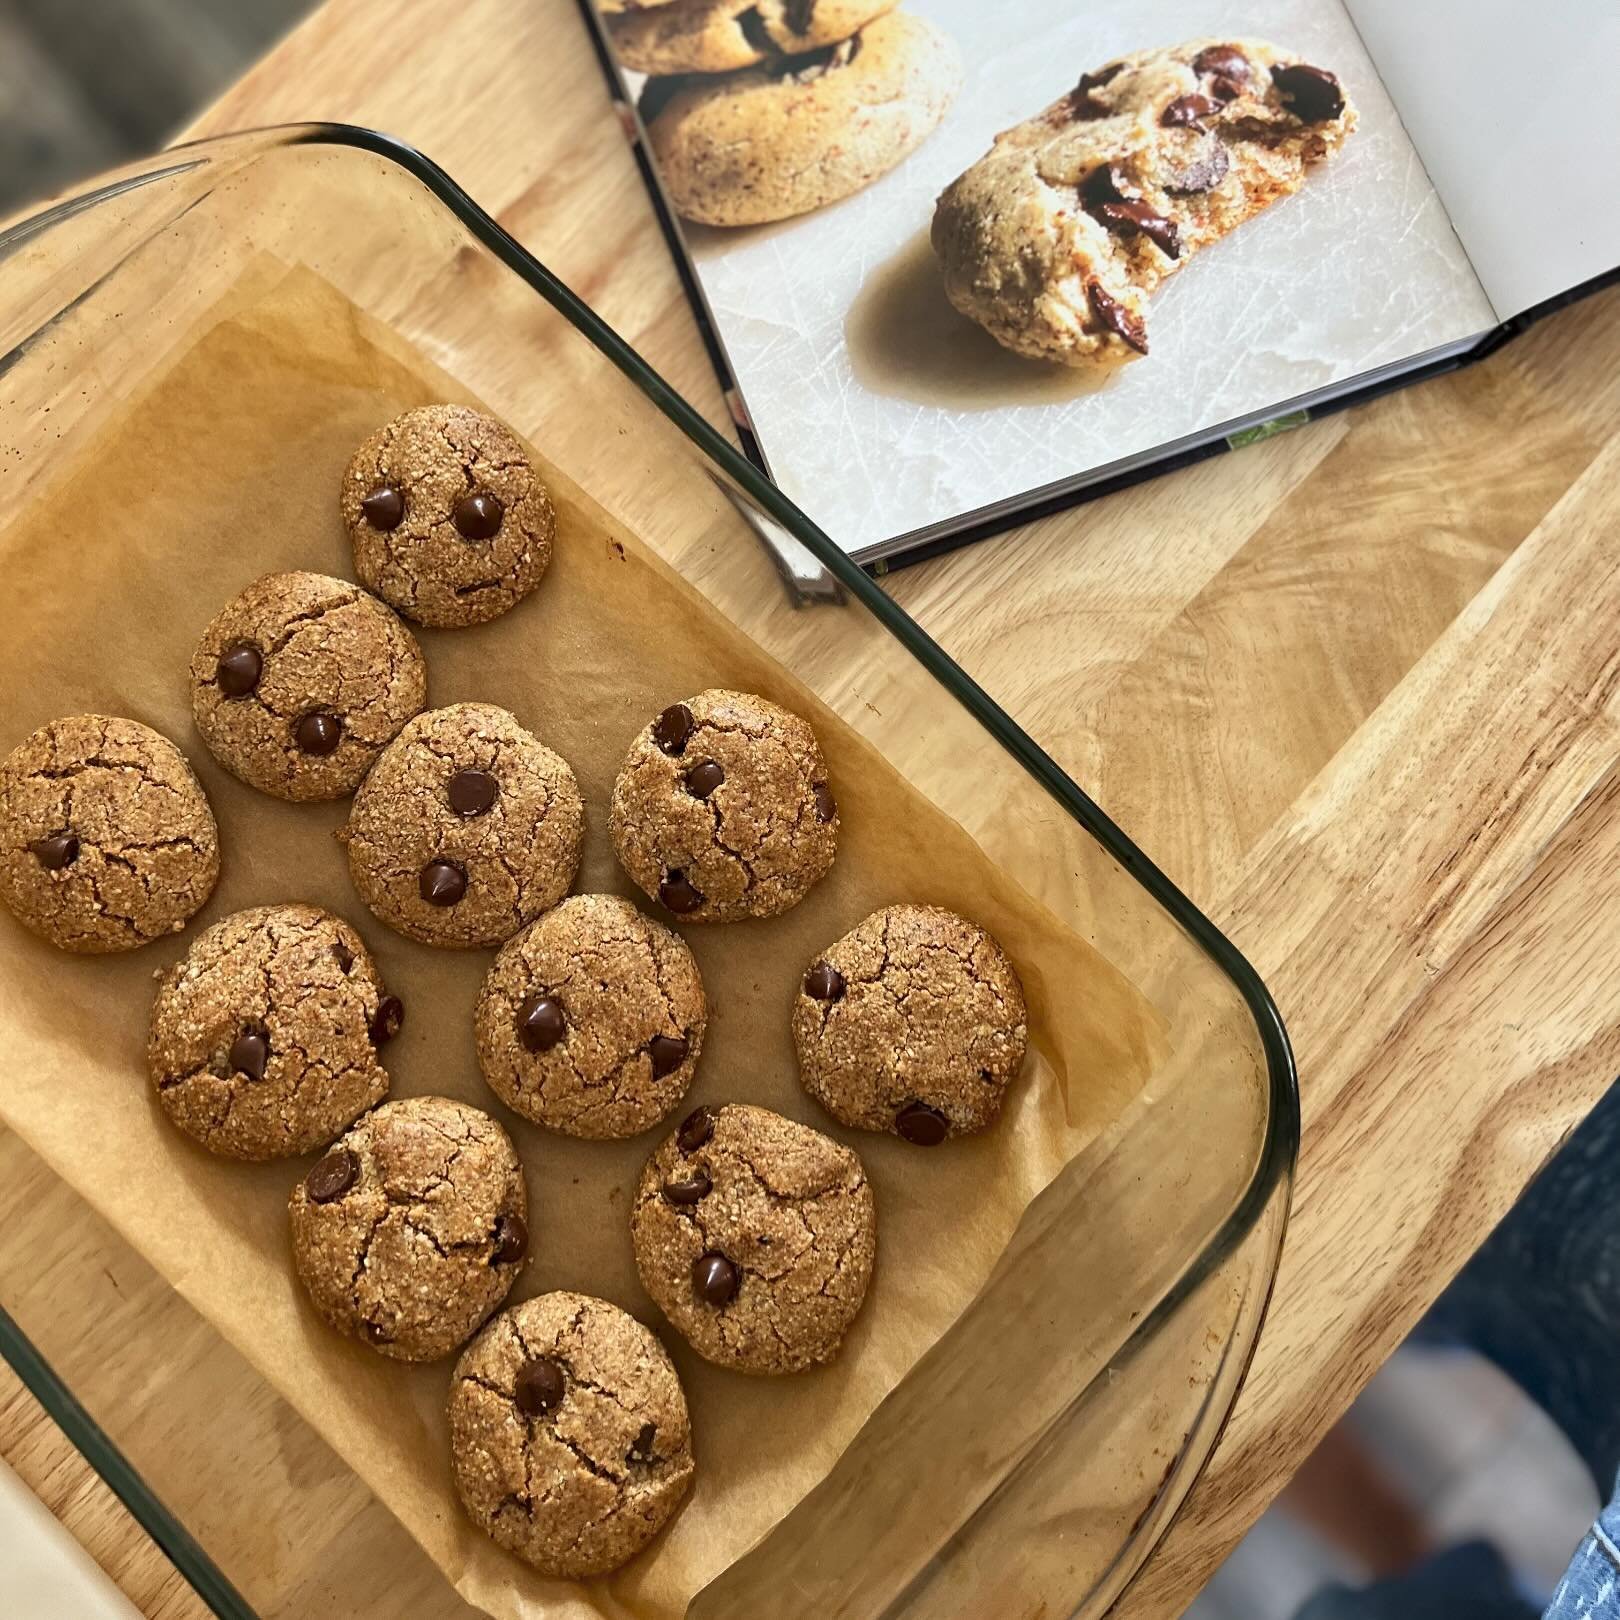 Fall in love with our easy to make vegan &amp; gluten-free chocolate chip cookies! 😋🍪 ⁣
⁣
Follow simple steps in our recipe book to learn how to bake our delicious cookies + some of our other favorite homemade desserts ✨⁣⁣
⁣
Our cookbook is sold ex